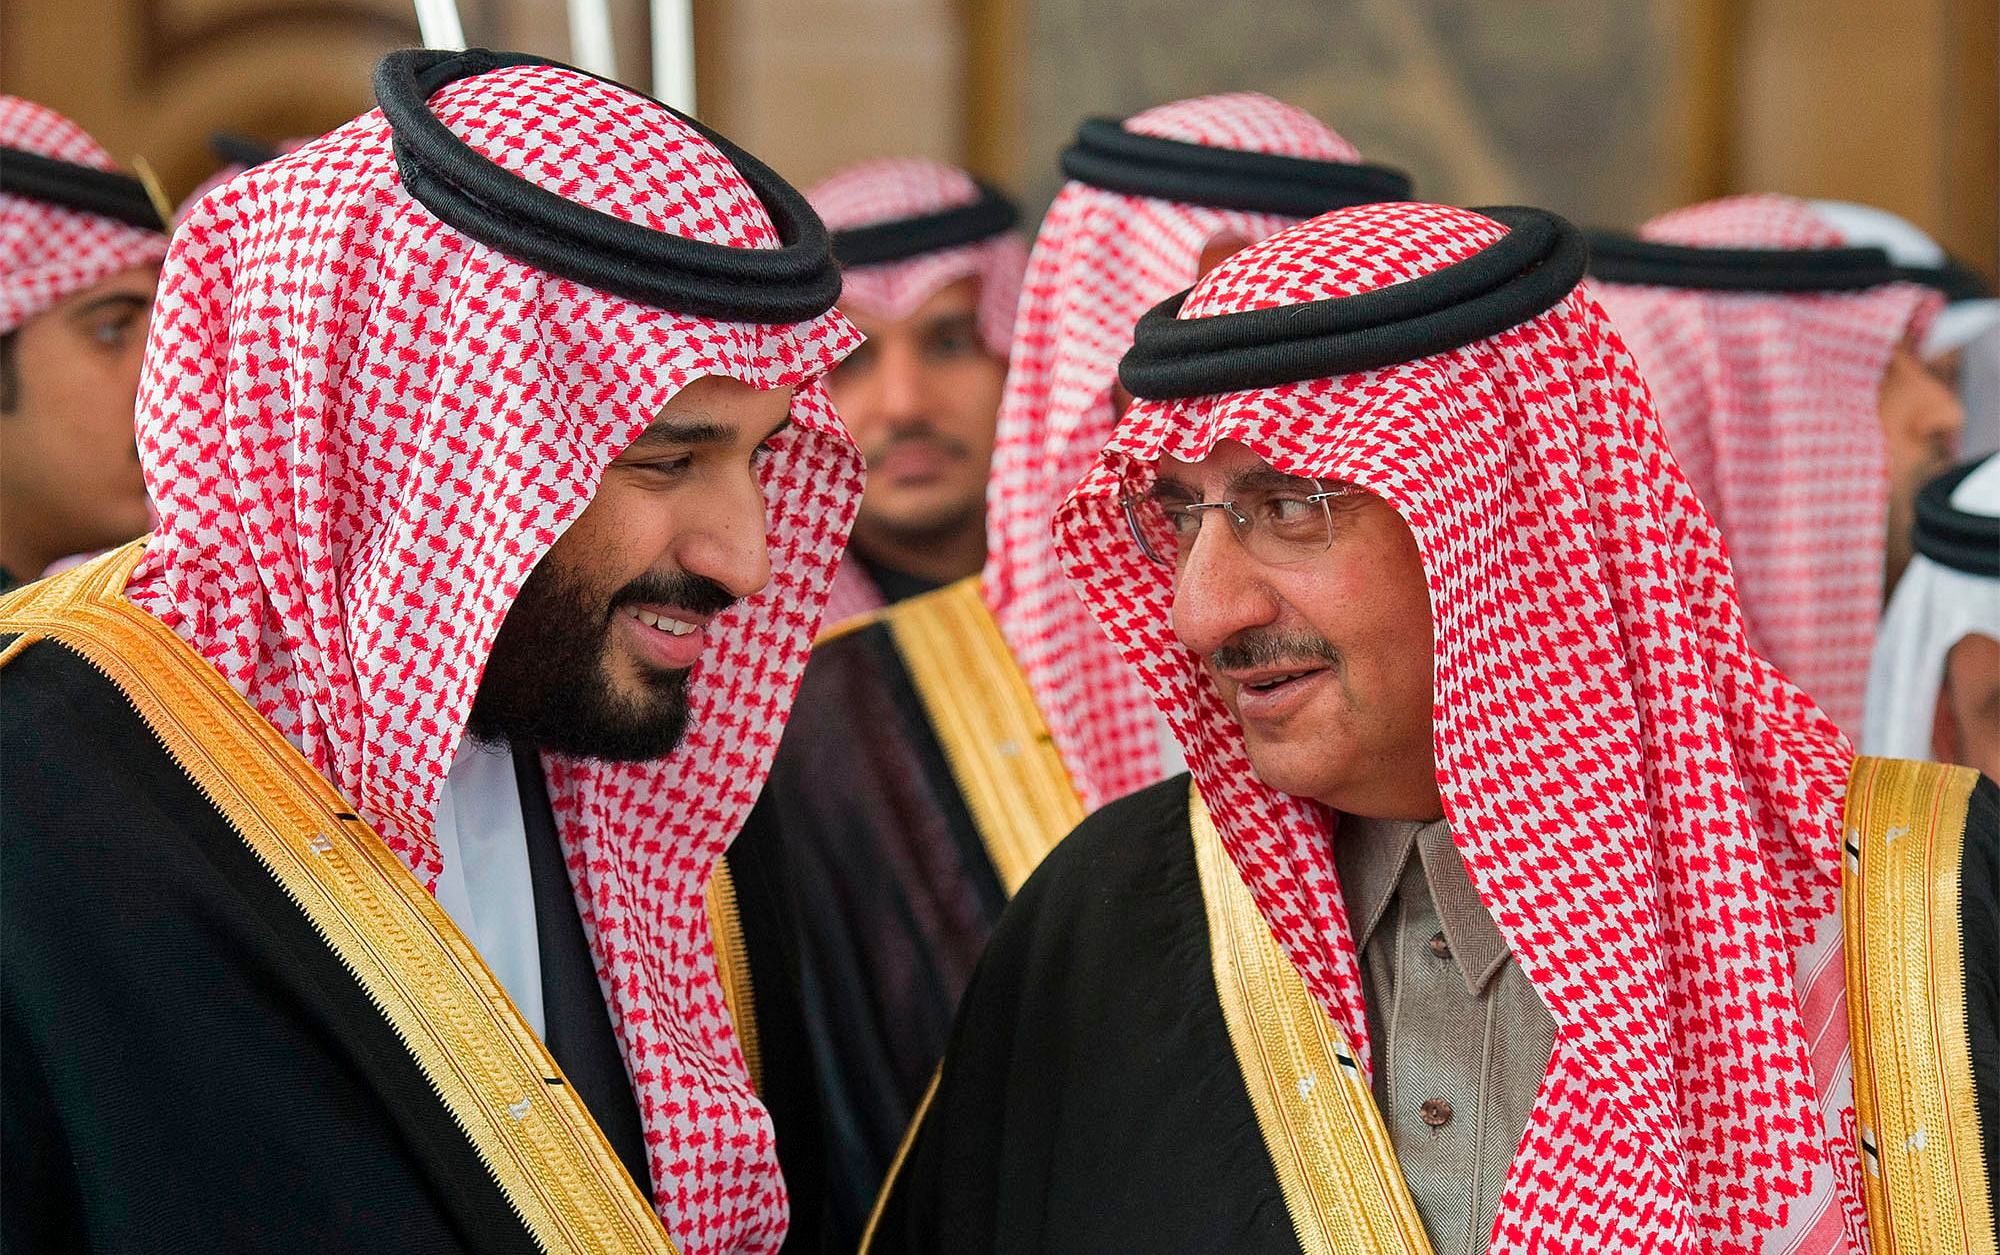 A handout picture release by Saudi Royal Palace on December 14, 2016 shows Saudi Crown Prince Mohammed bin Nayef (R) speaking with deputy Crown Prince Mohammed bin Salman during the opening session of the Shura Council in Riyadh. (AP)